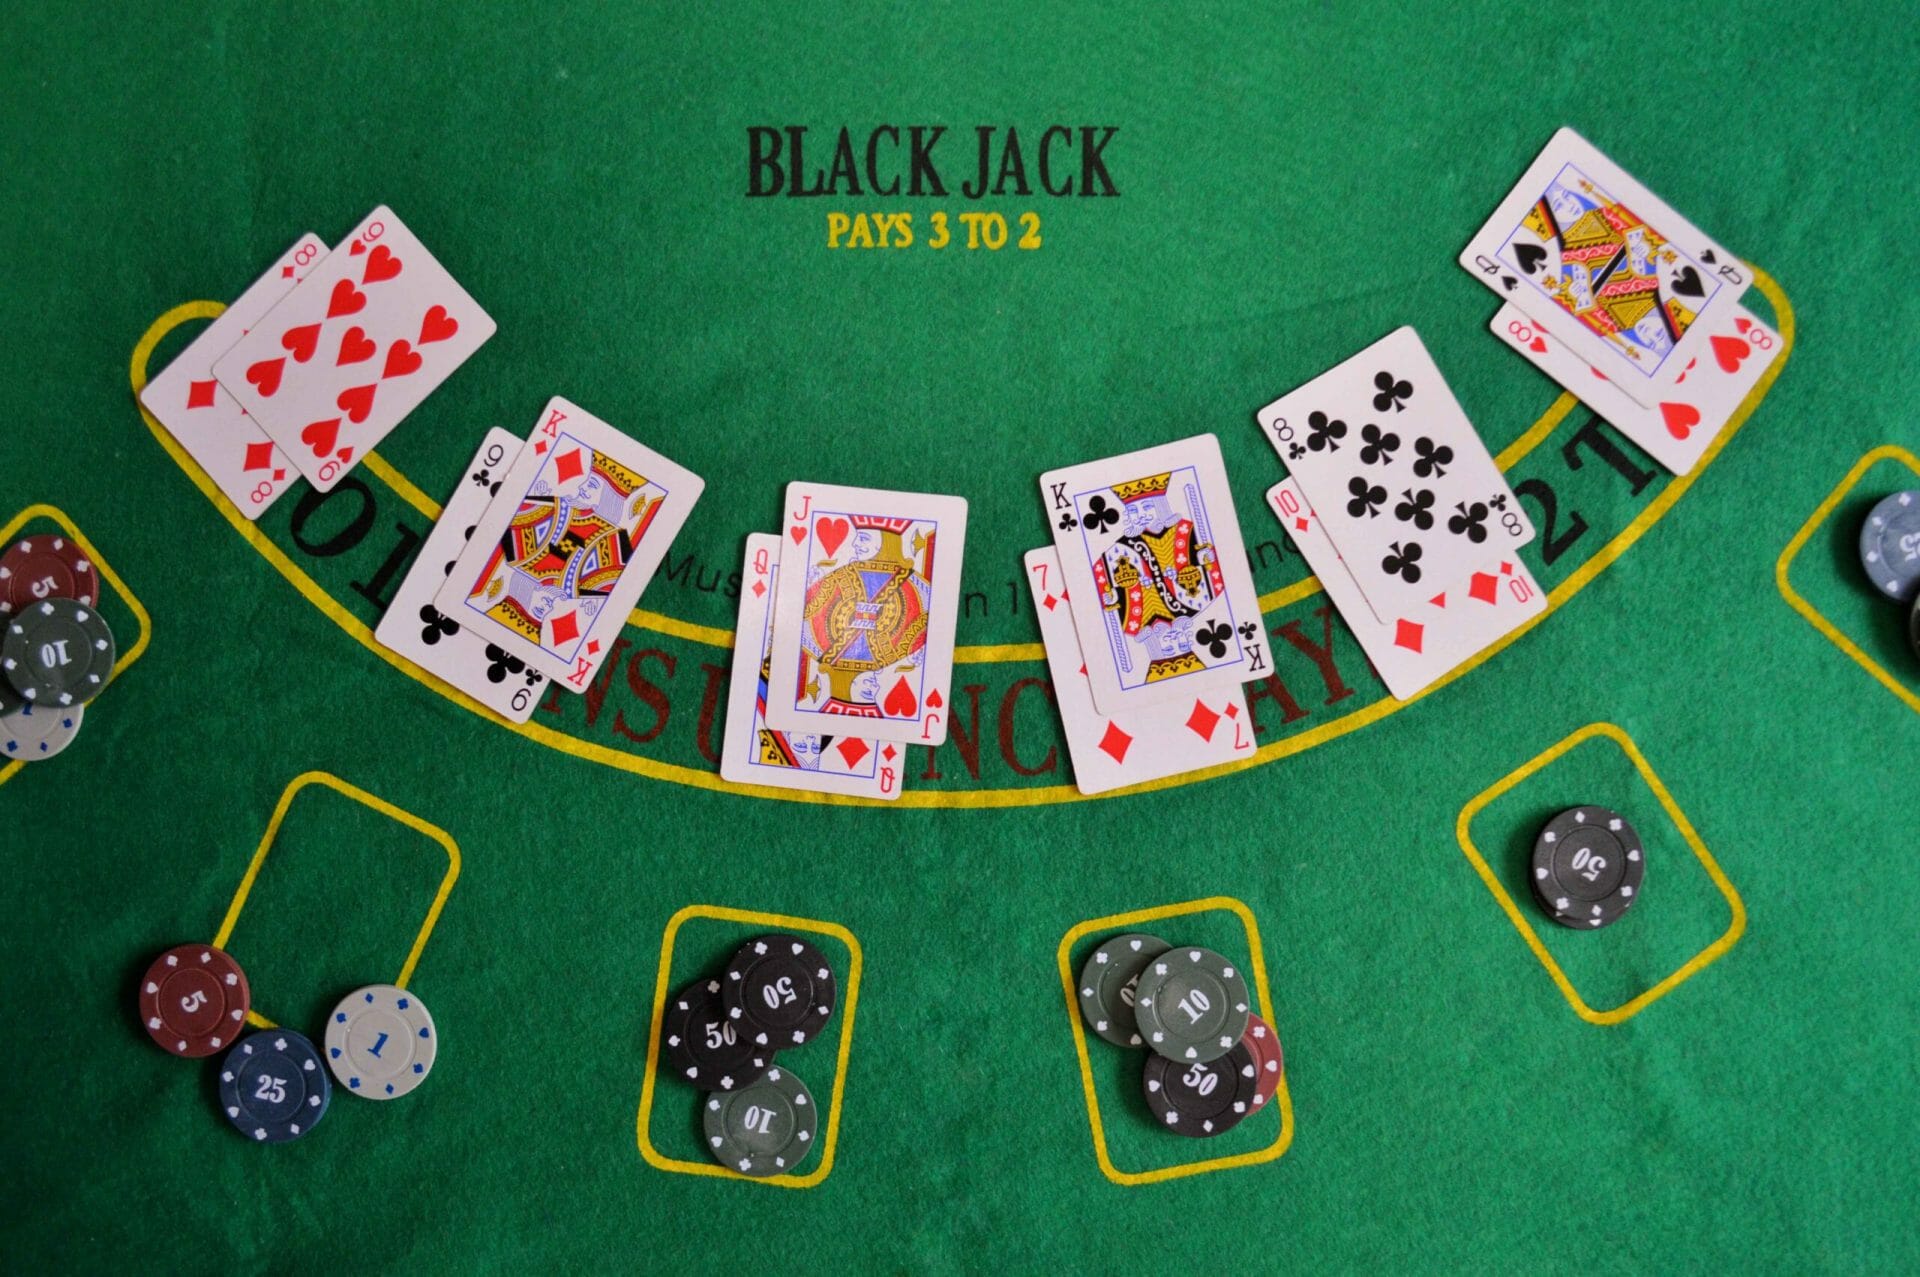 How To Count Cards in Blackjack